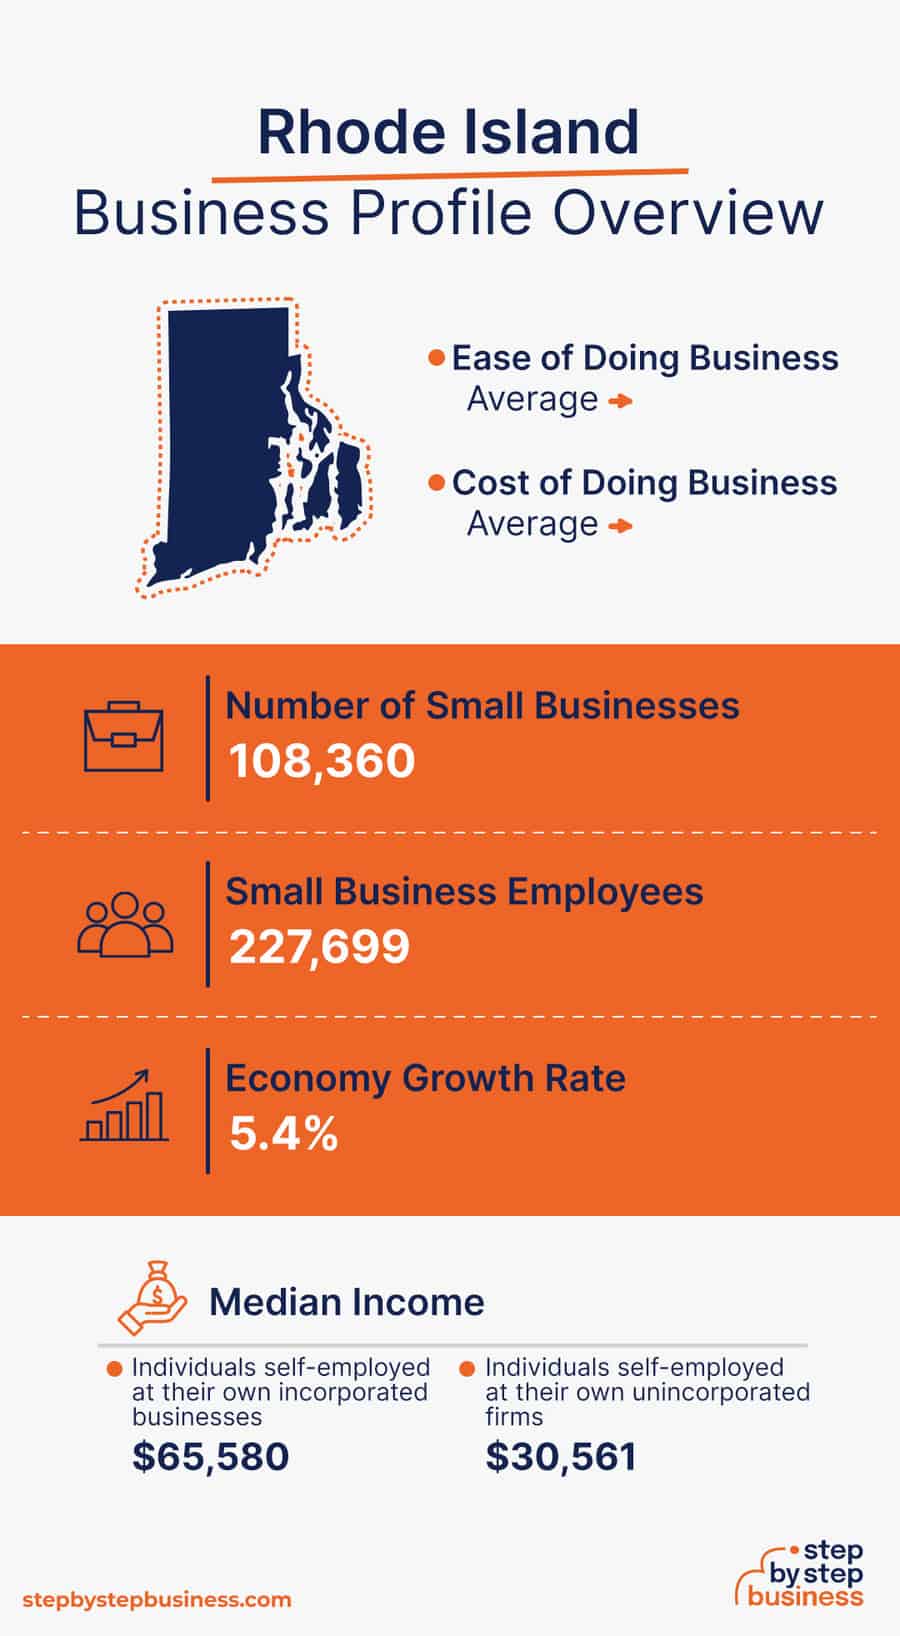 Rhode Island Business Profile Overview